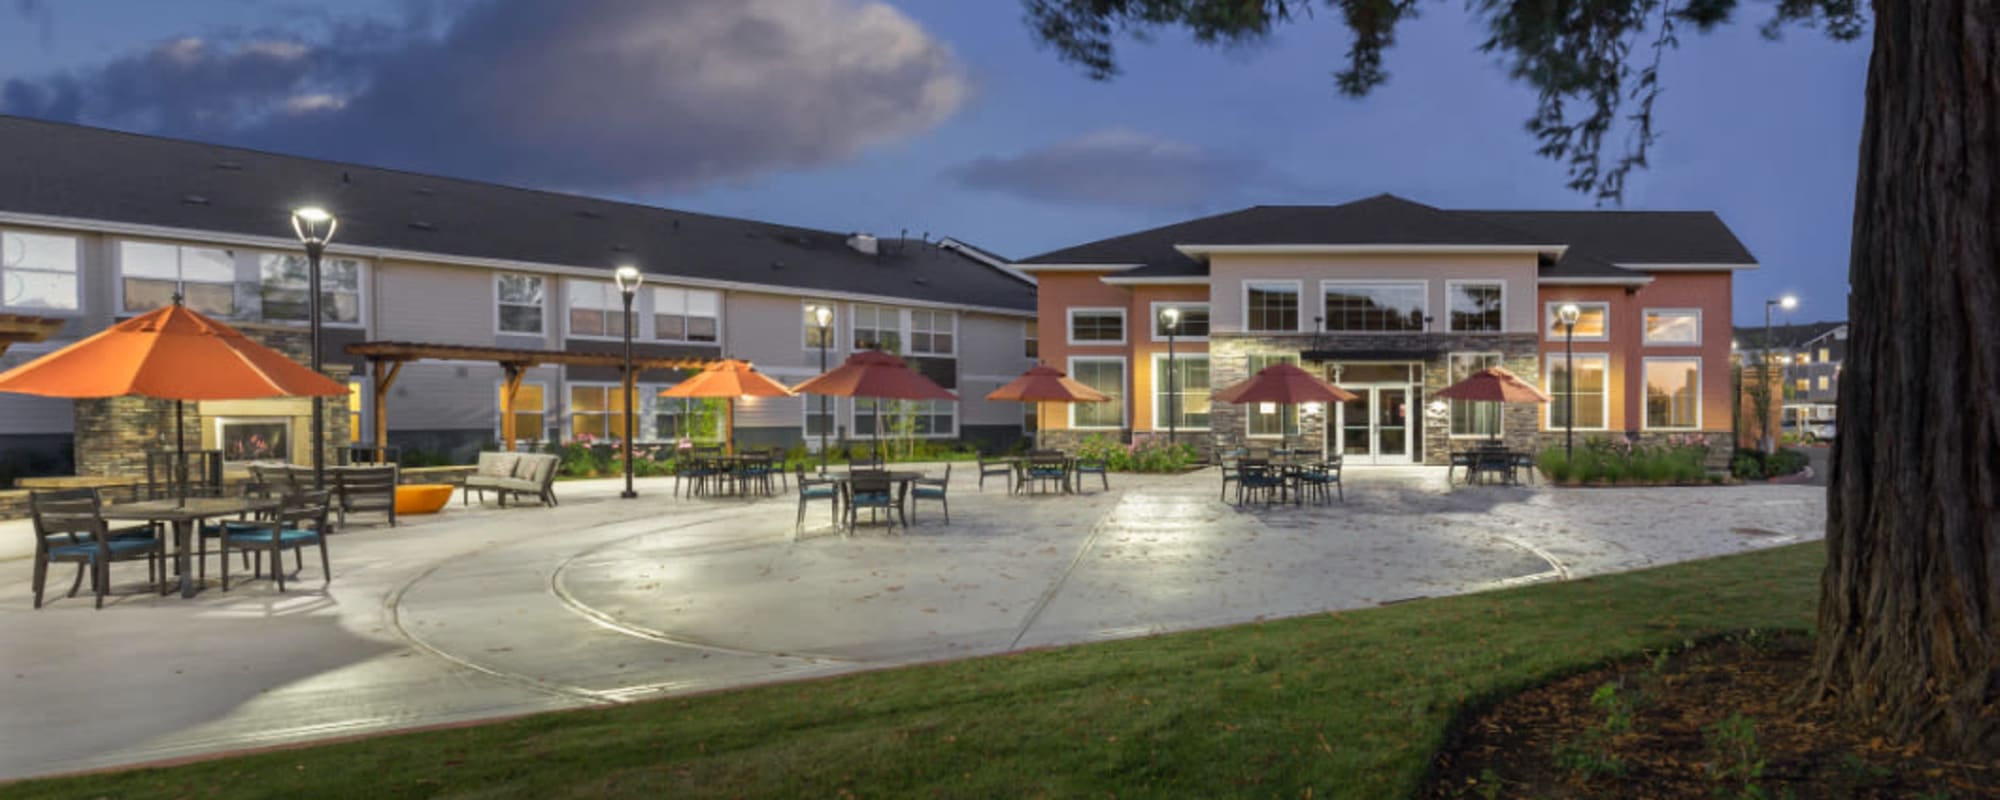 Back patio of upscale senior living facility with cheerful orange umbrellas at The Springs at Sherwood in Sherwood, Oregon